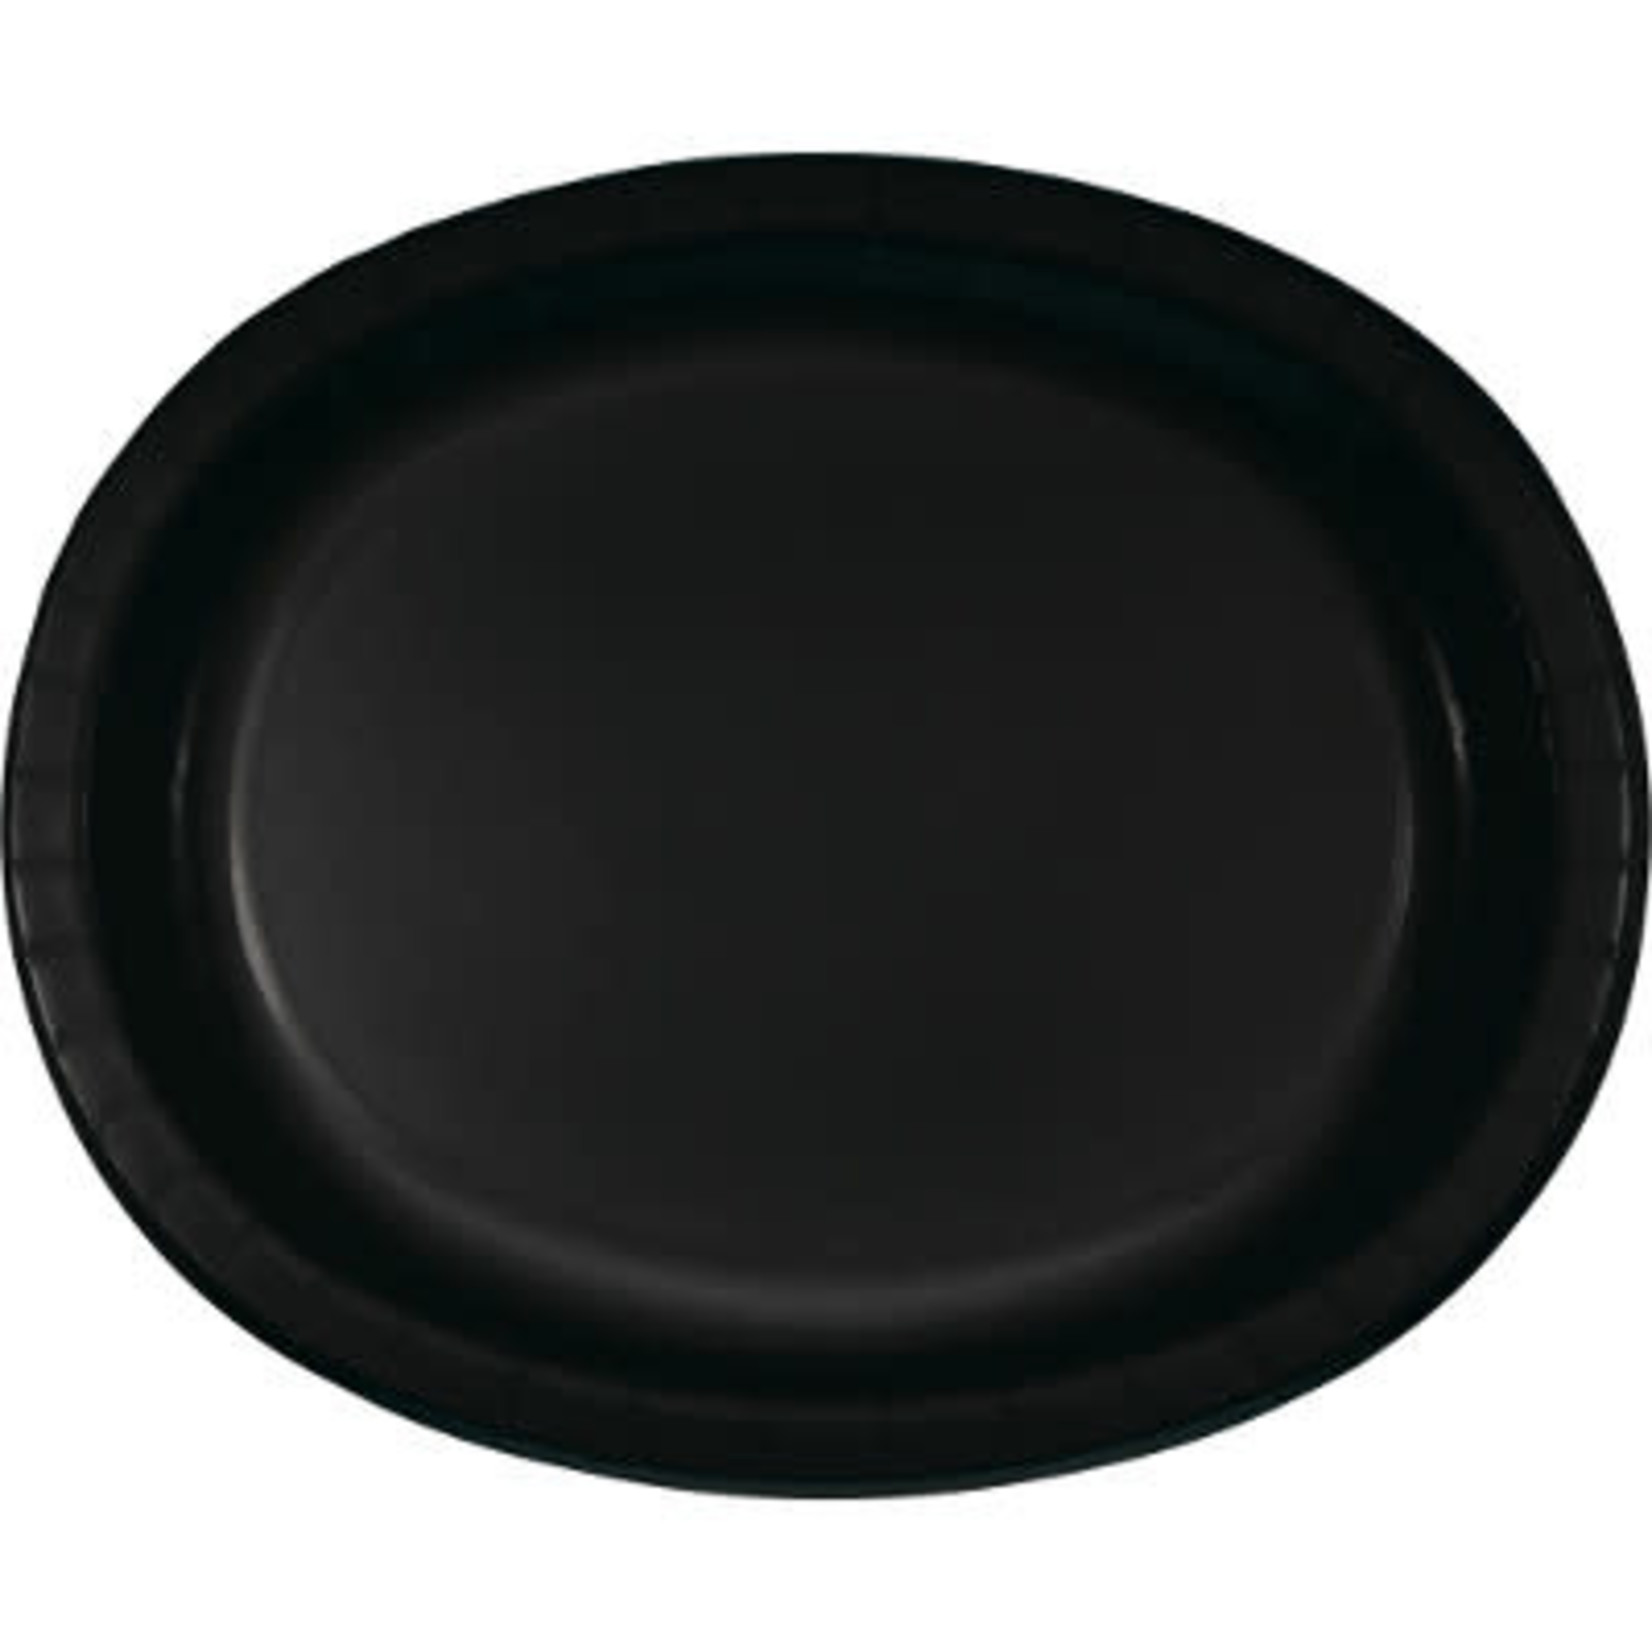 Touch of Color 10" x 12" Black Oval Paper Plates - 8ct.